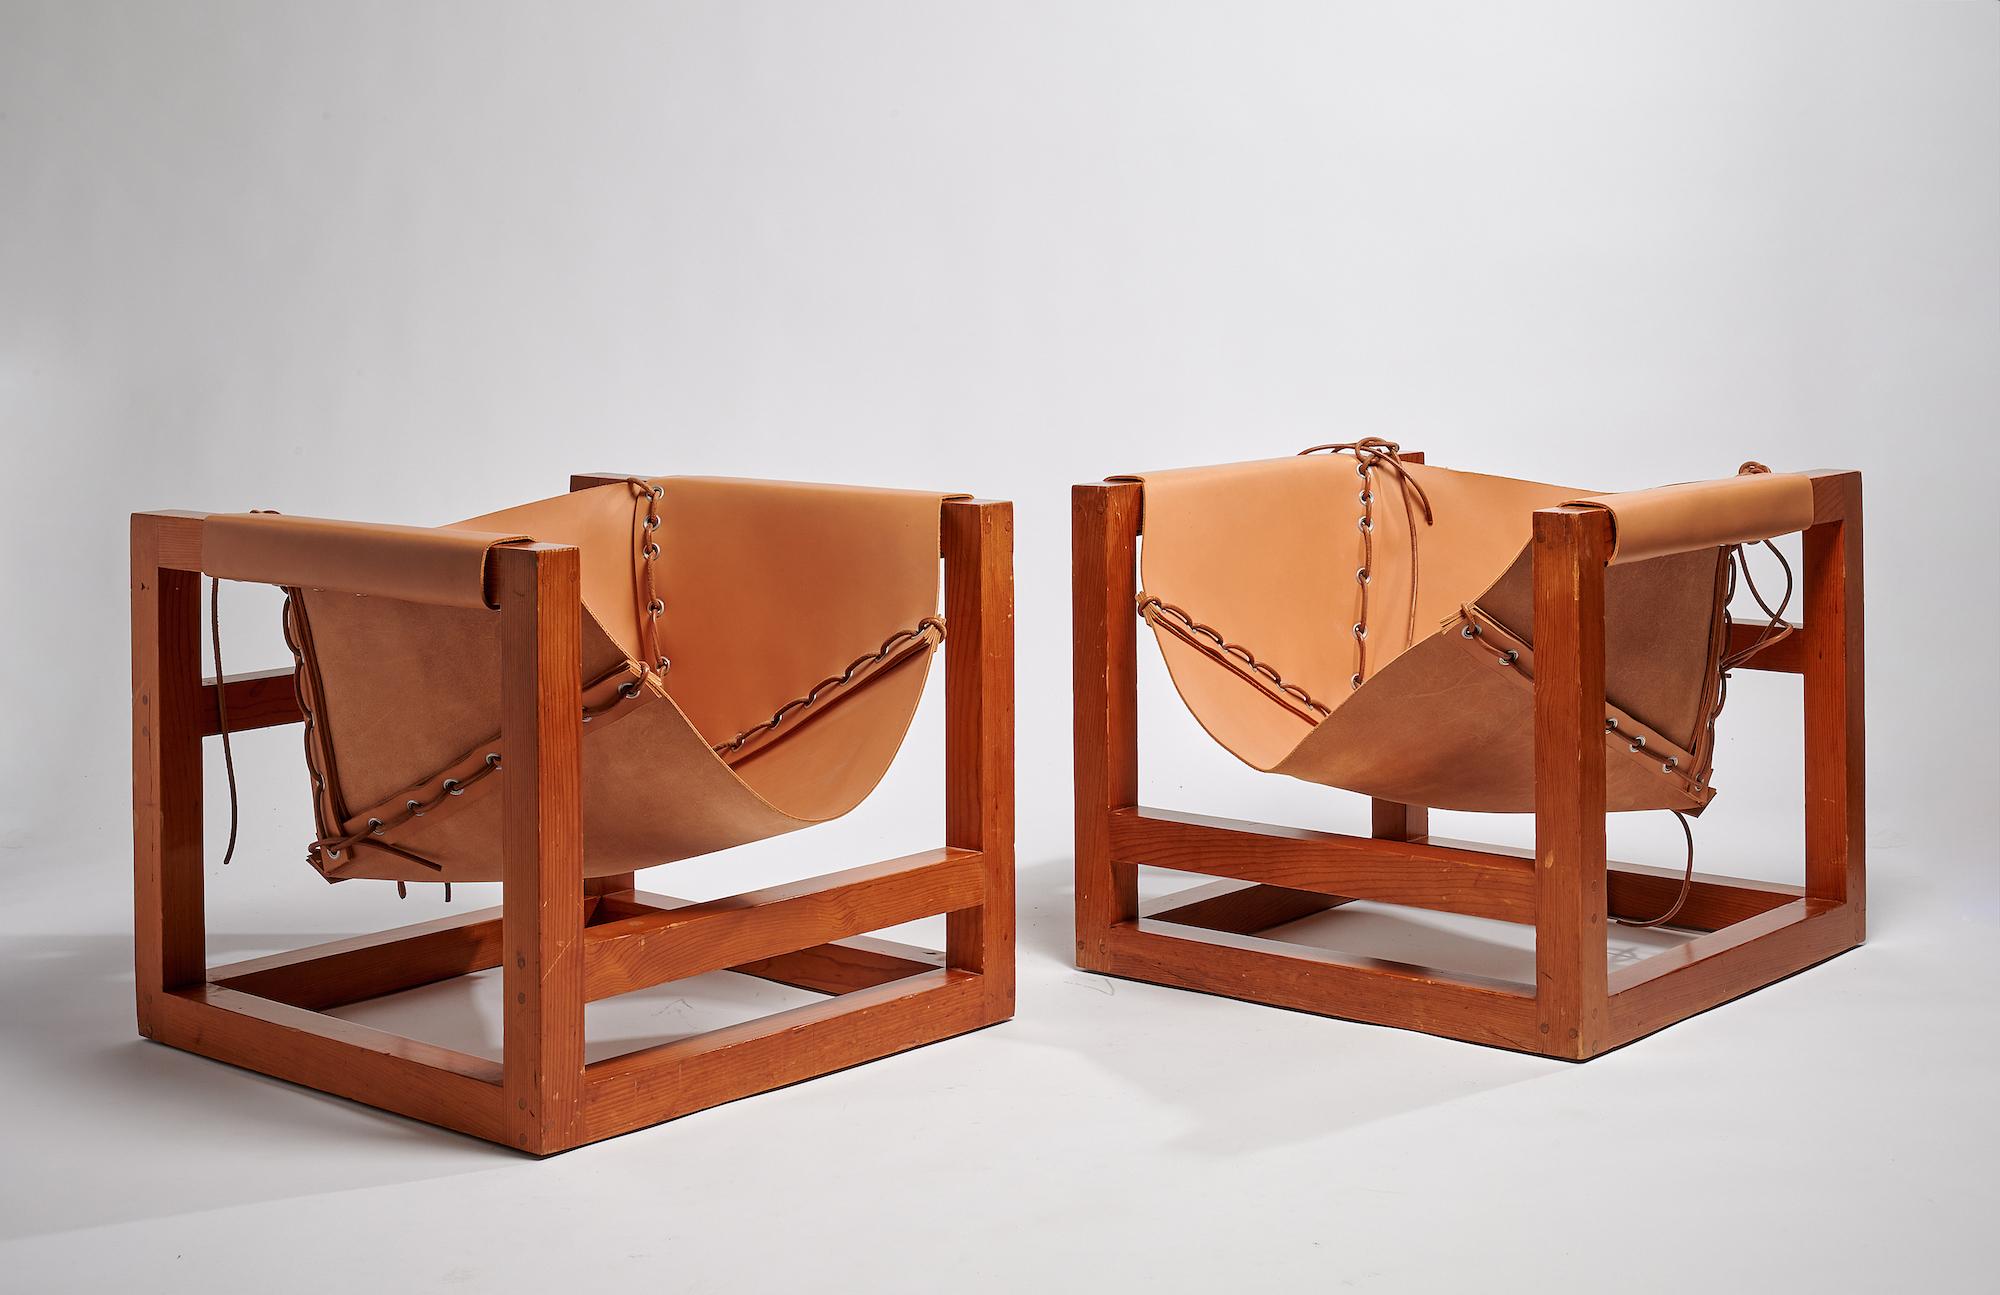 Pair of lounge Chairs, model Tail 4 by Heinz Witthoeft
Pine wood structure with leather seat and leather straps

A pair of matching coffee table included

Also available in full black wood and leather